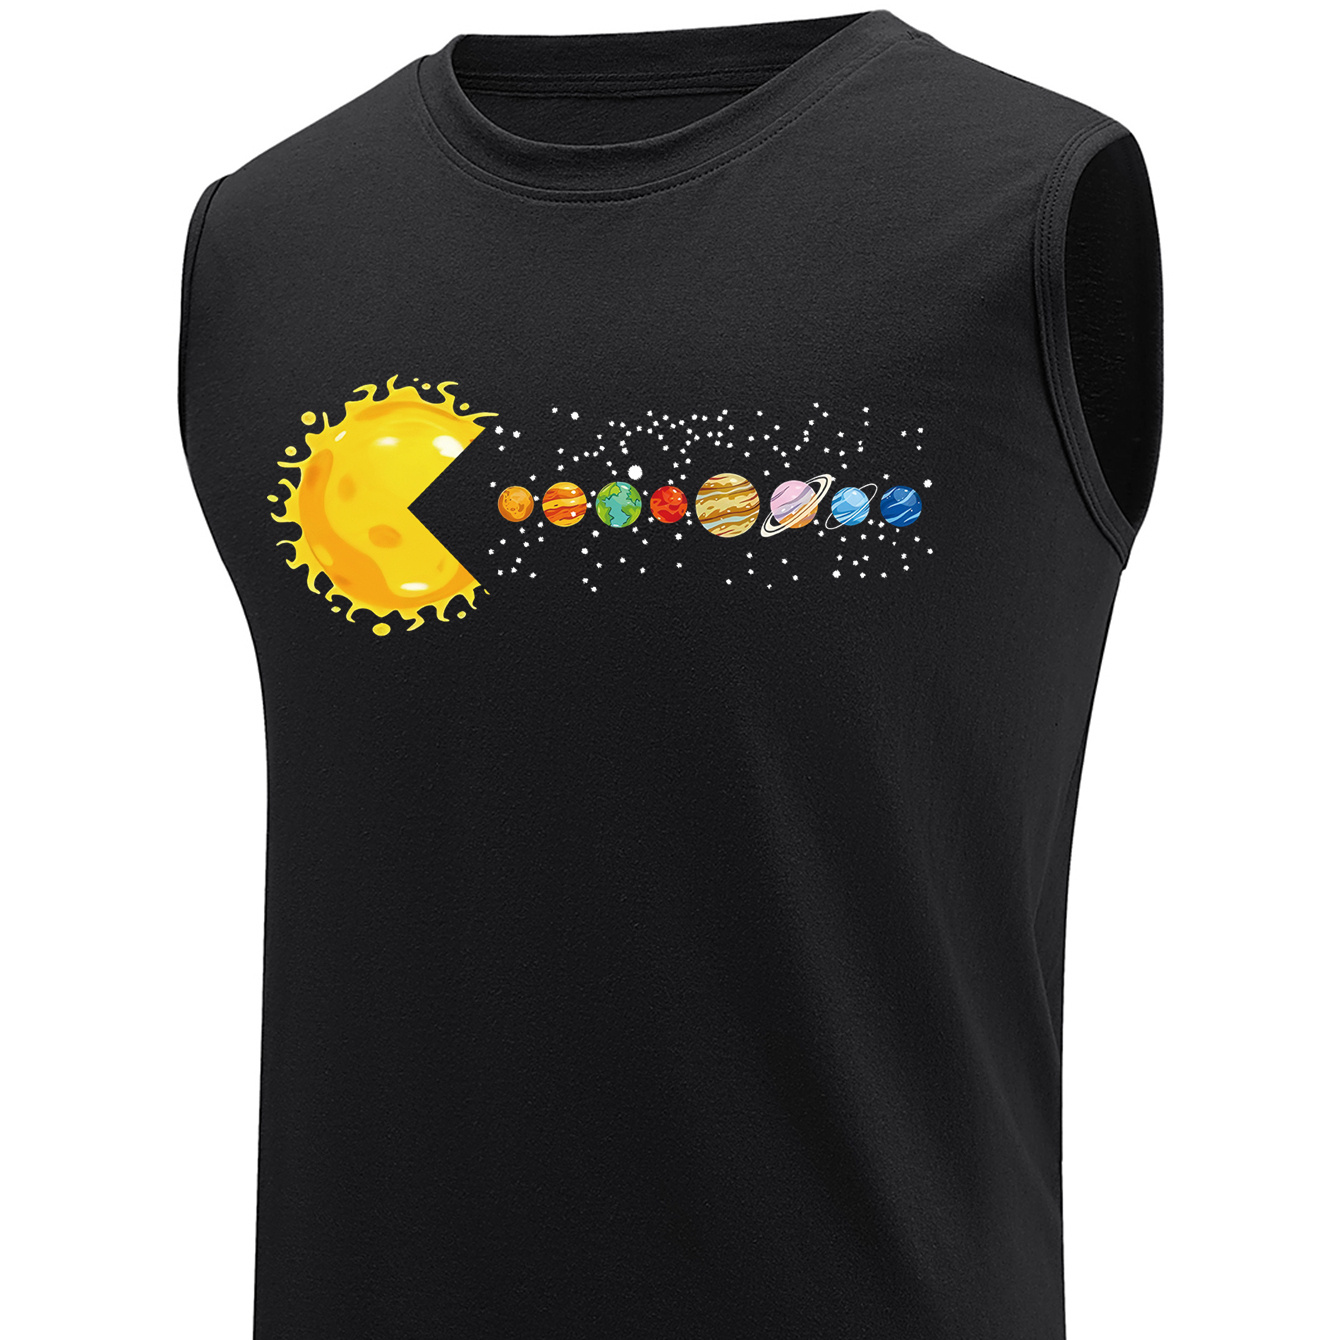 

Plus Size Men's Planets Graphic Print Tank Top, Sports Fitness Sleeveless Tees For Males